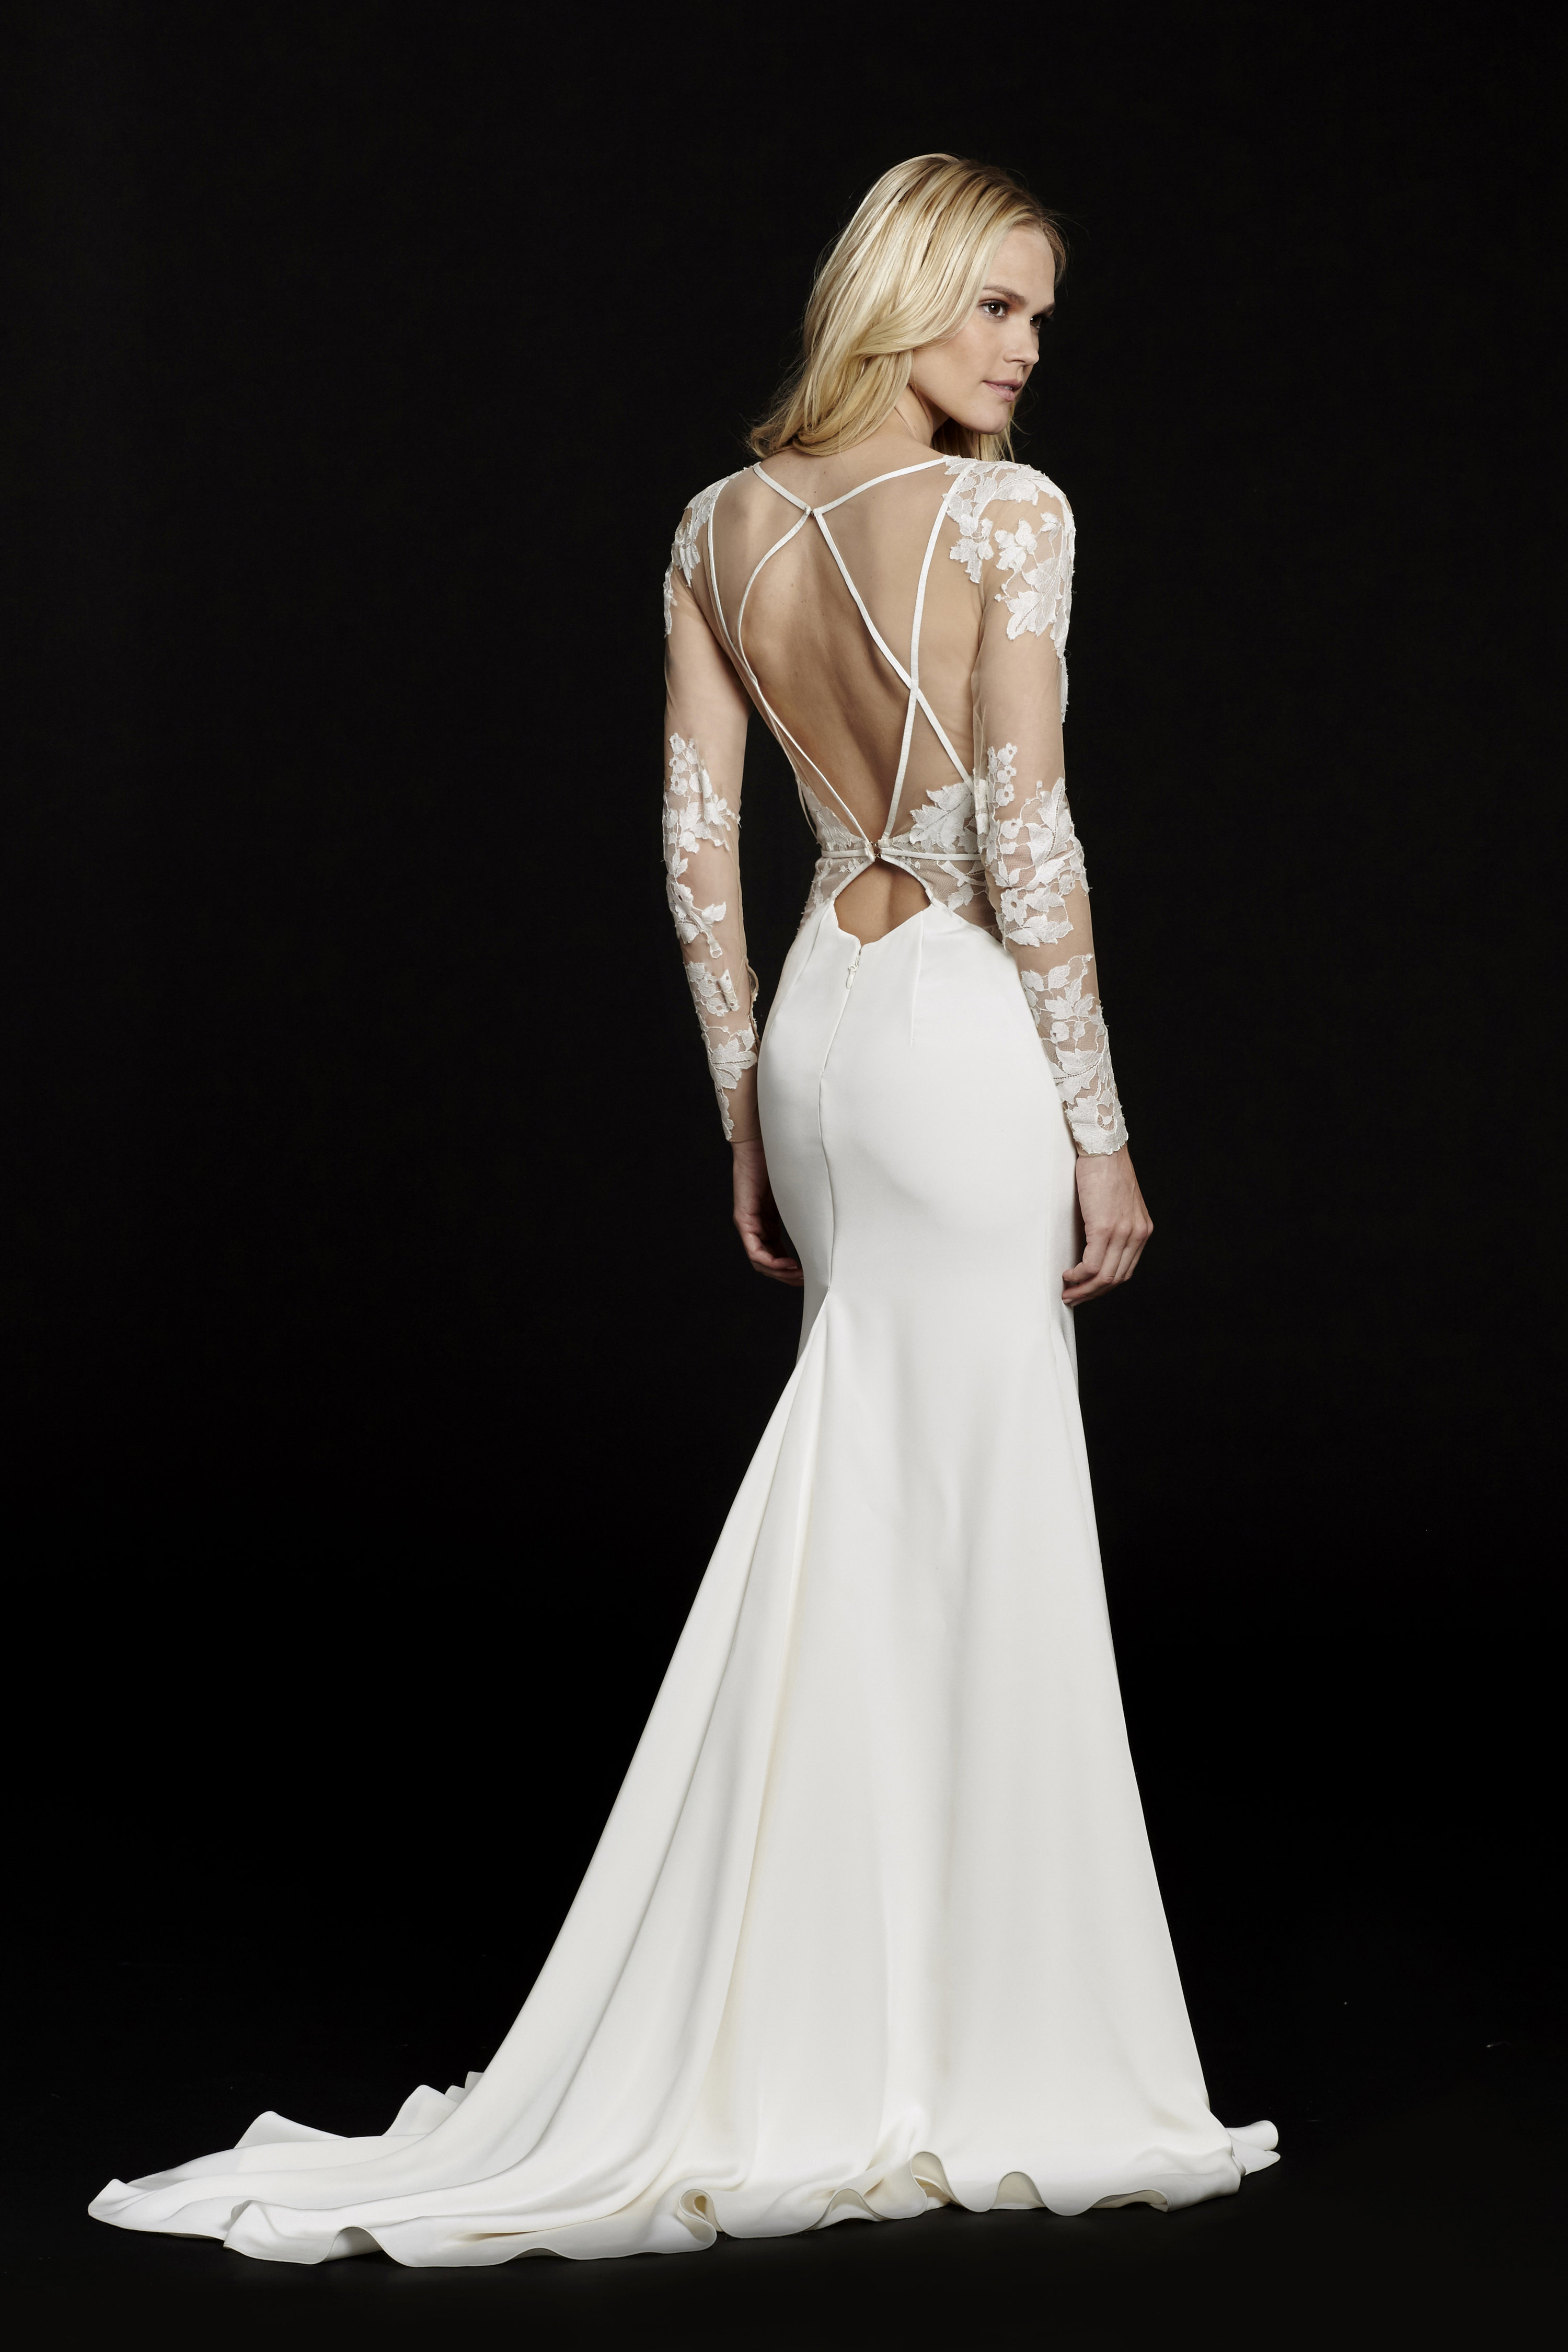  Bridal  Gowns  and Wedding  Dresses  by JLM Couture Style 6559